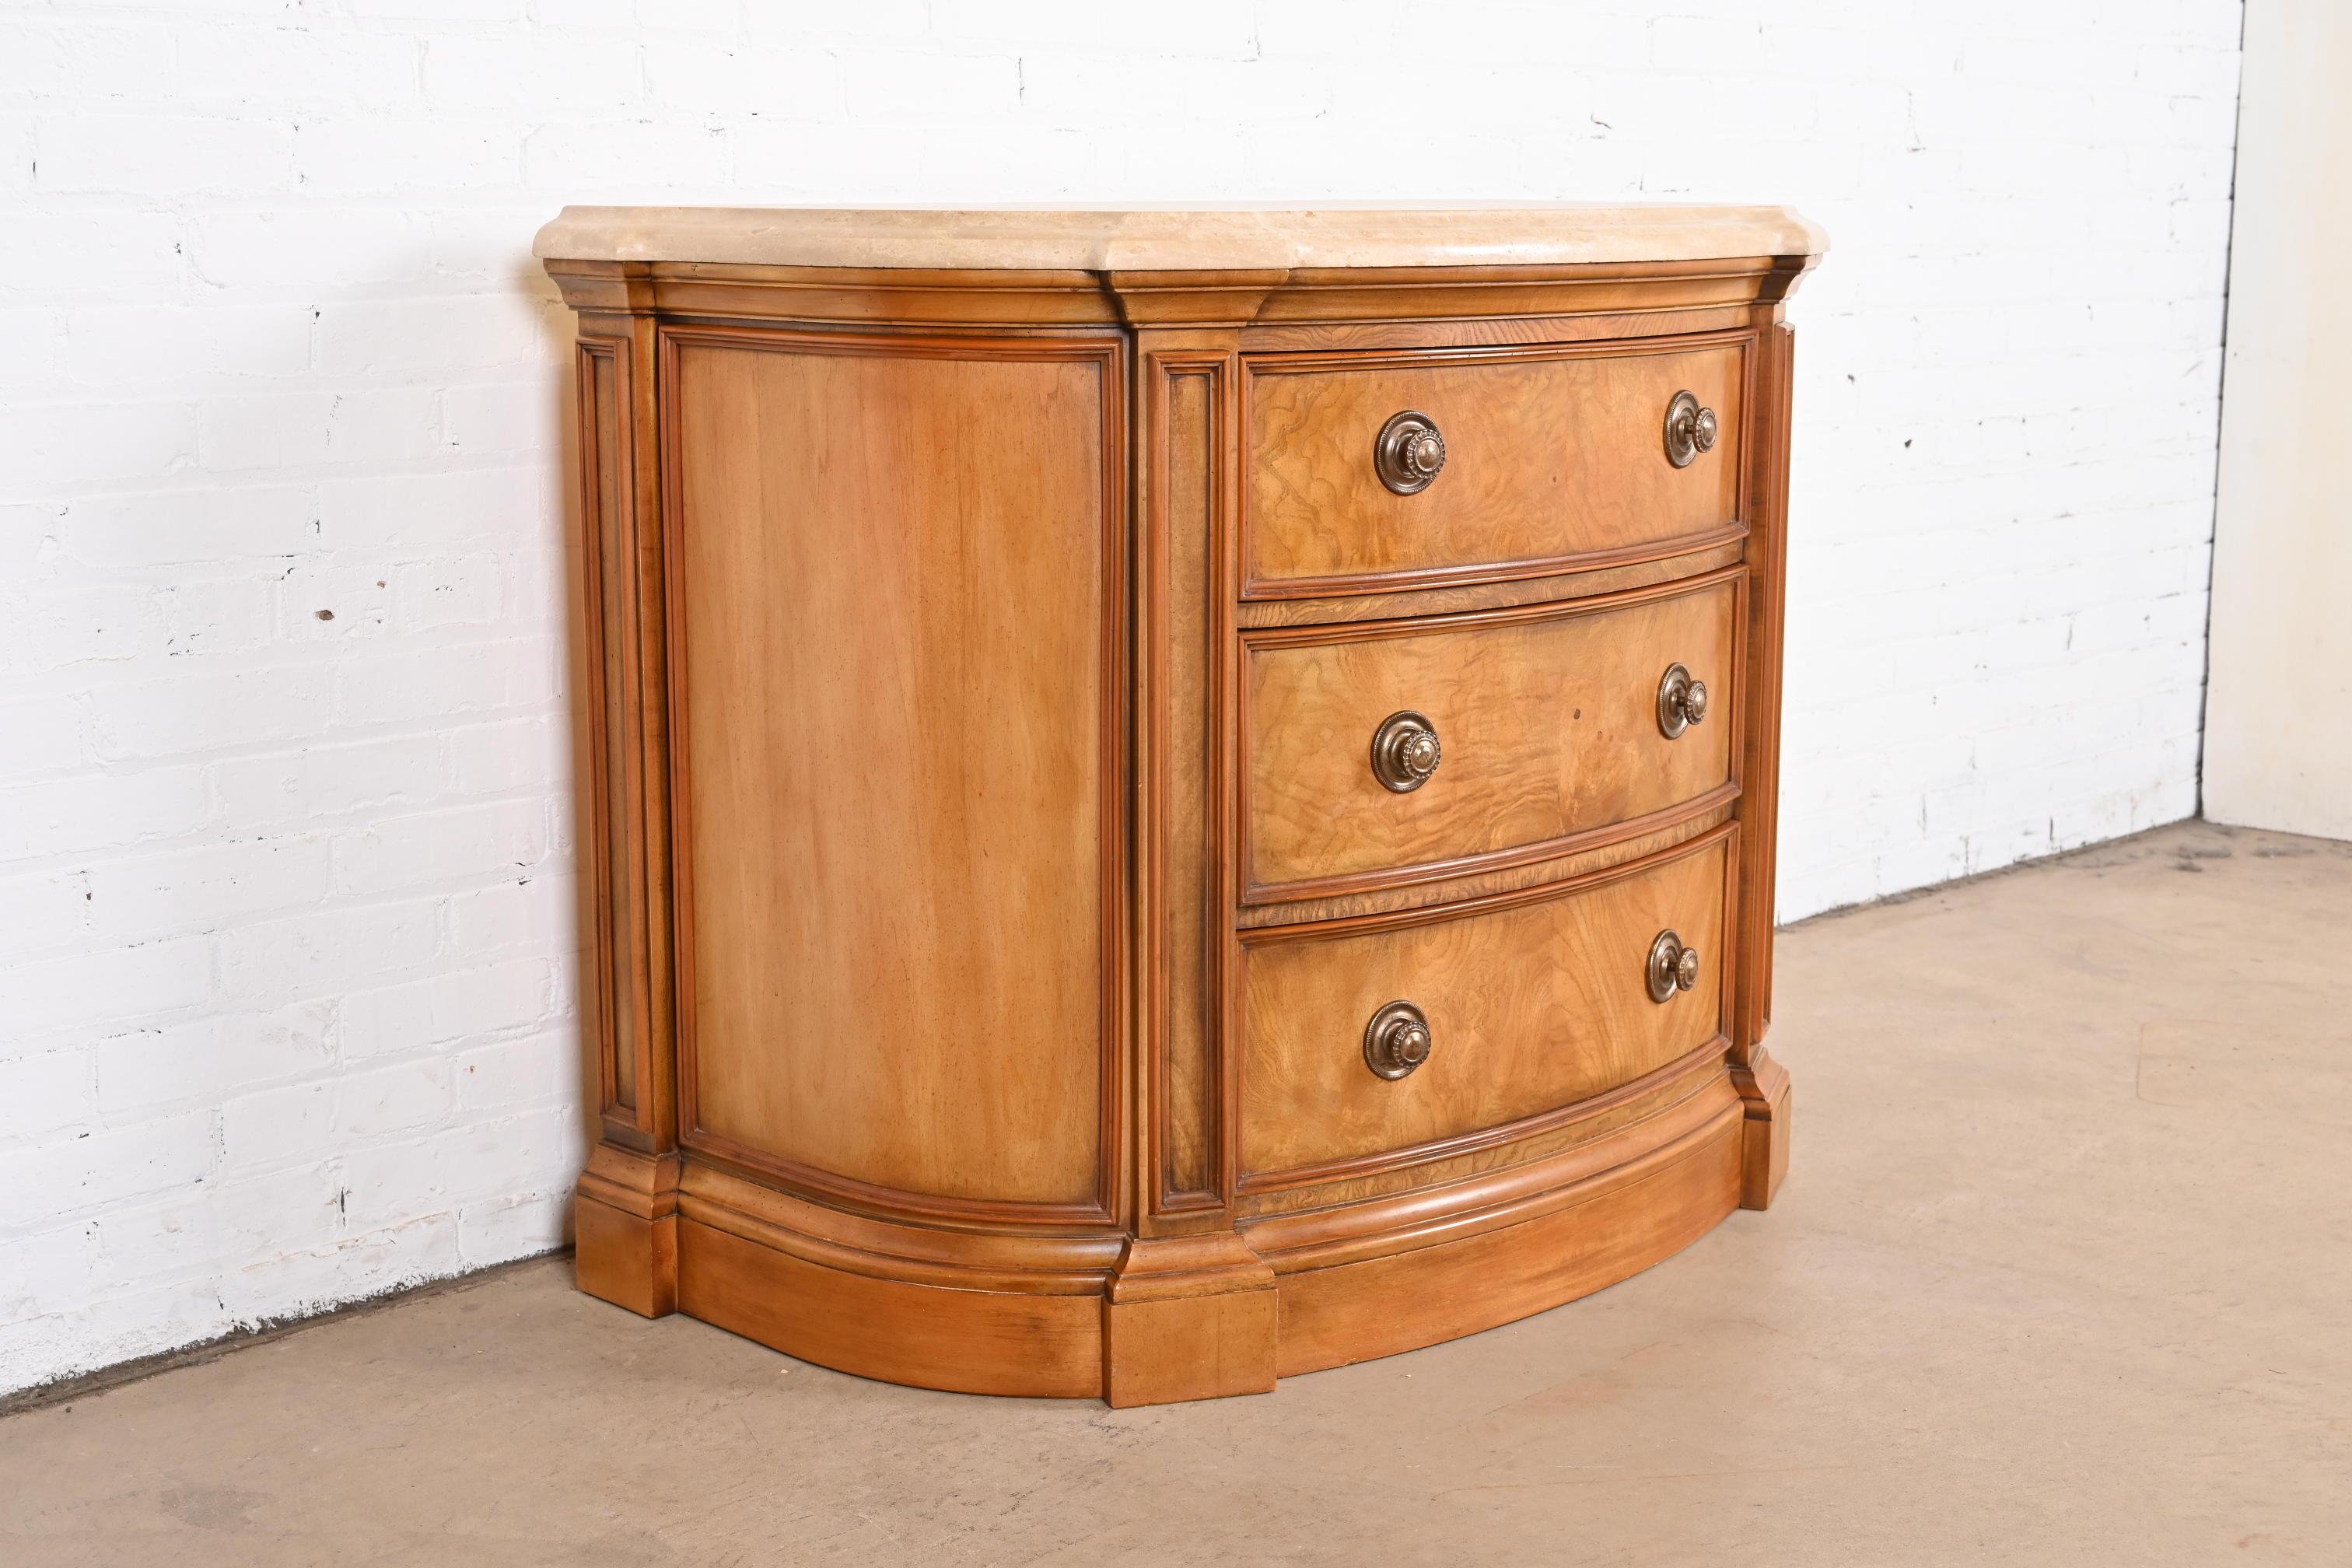 Henredon Burl Wood Regency Marble Top Demilune Commode or Chest of Drawers In Good Condition For Sale In South Bend, IN